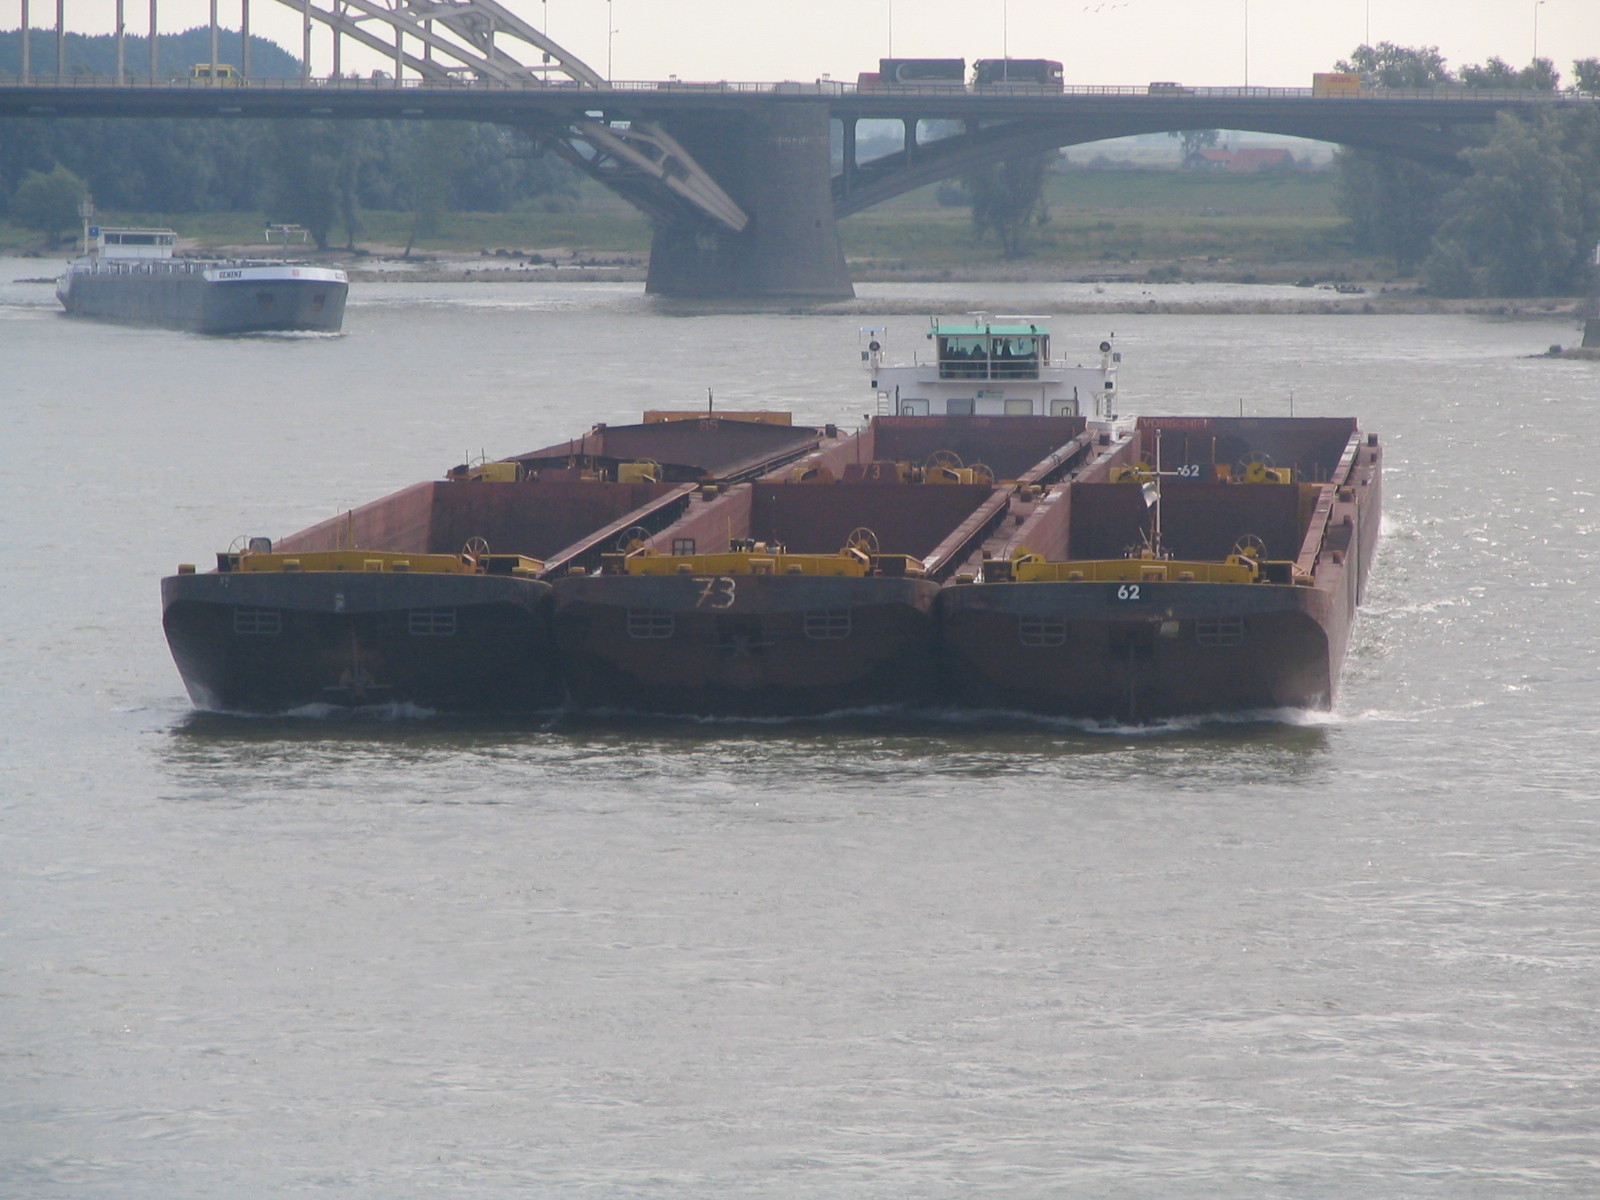 Herkules IV with 6 barges